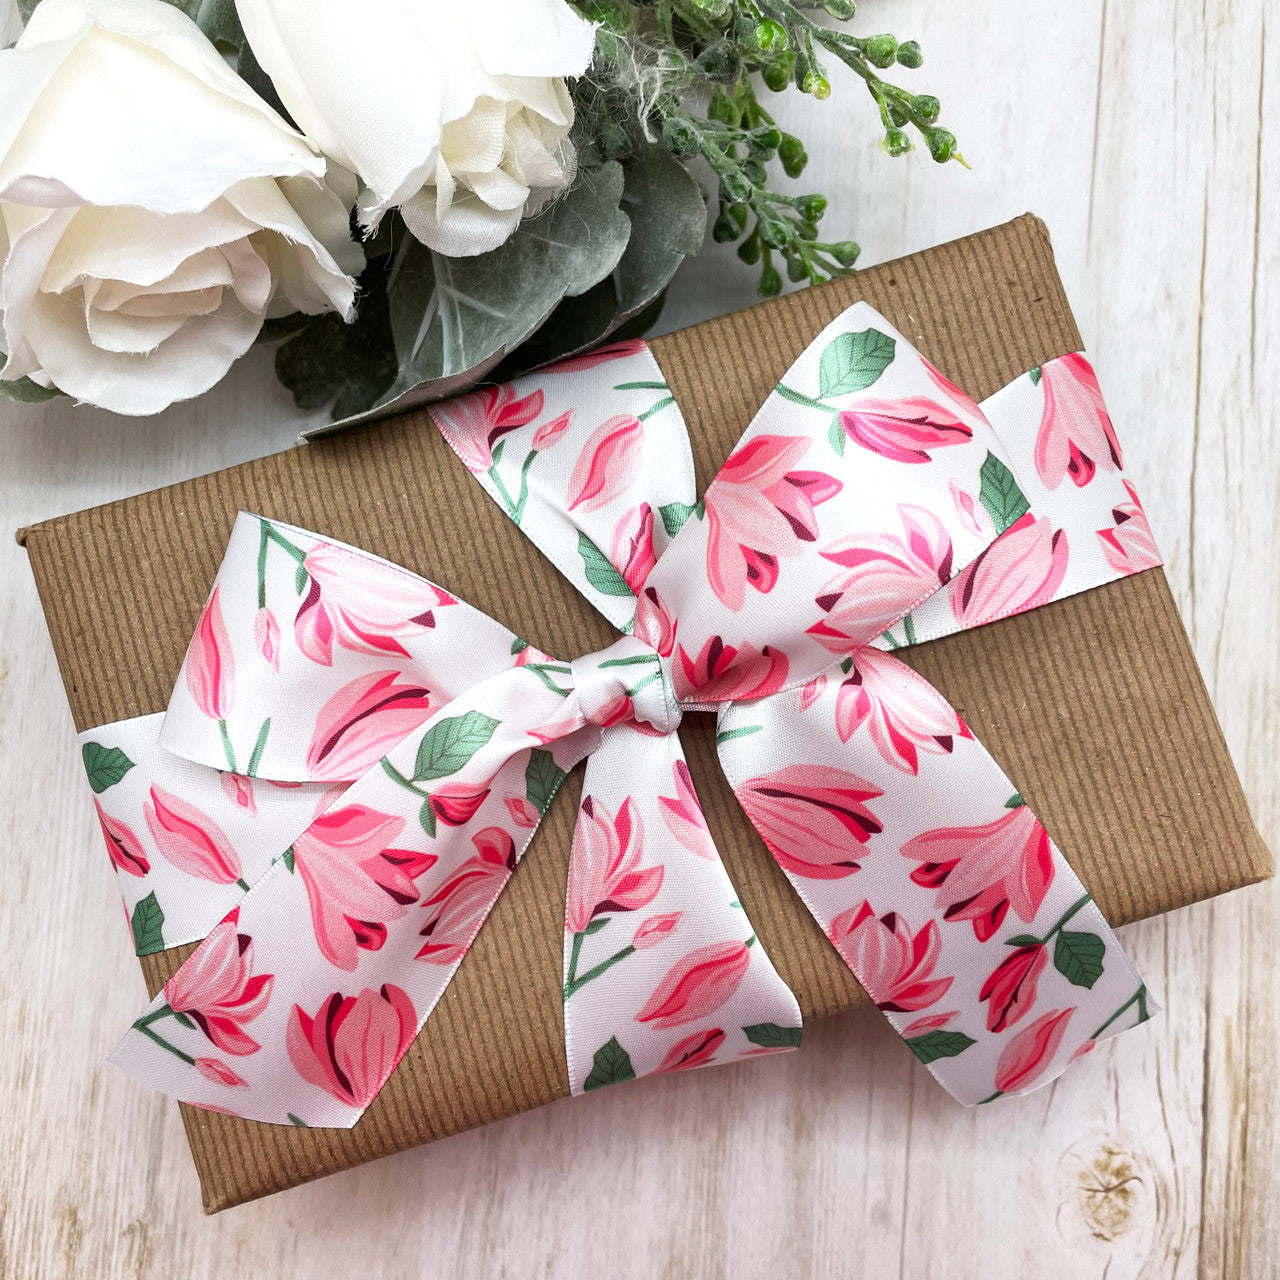 Our high quality ribbon ties the most beautiful bows to make your gift wrap truly special!